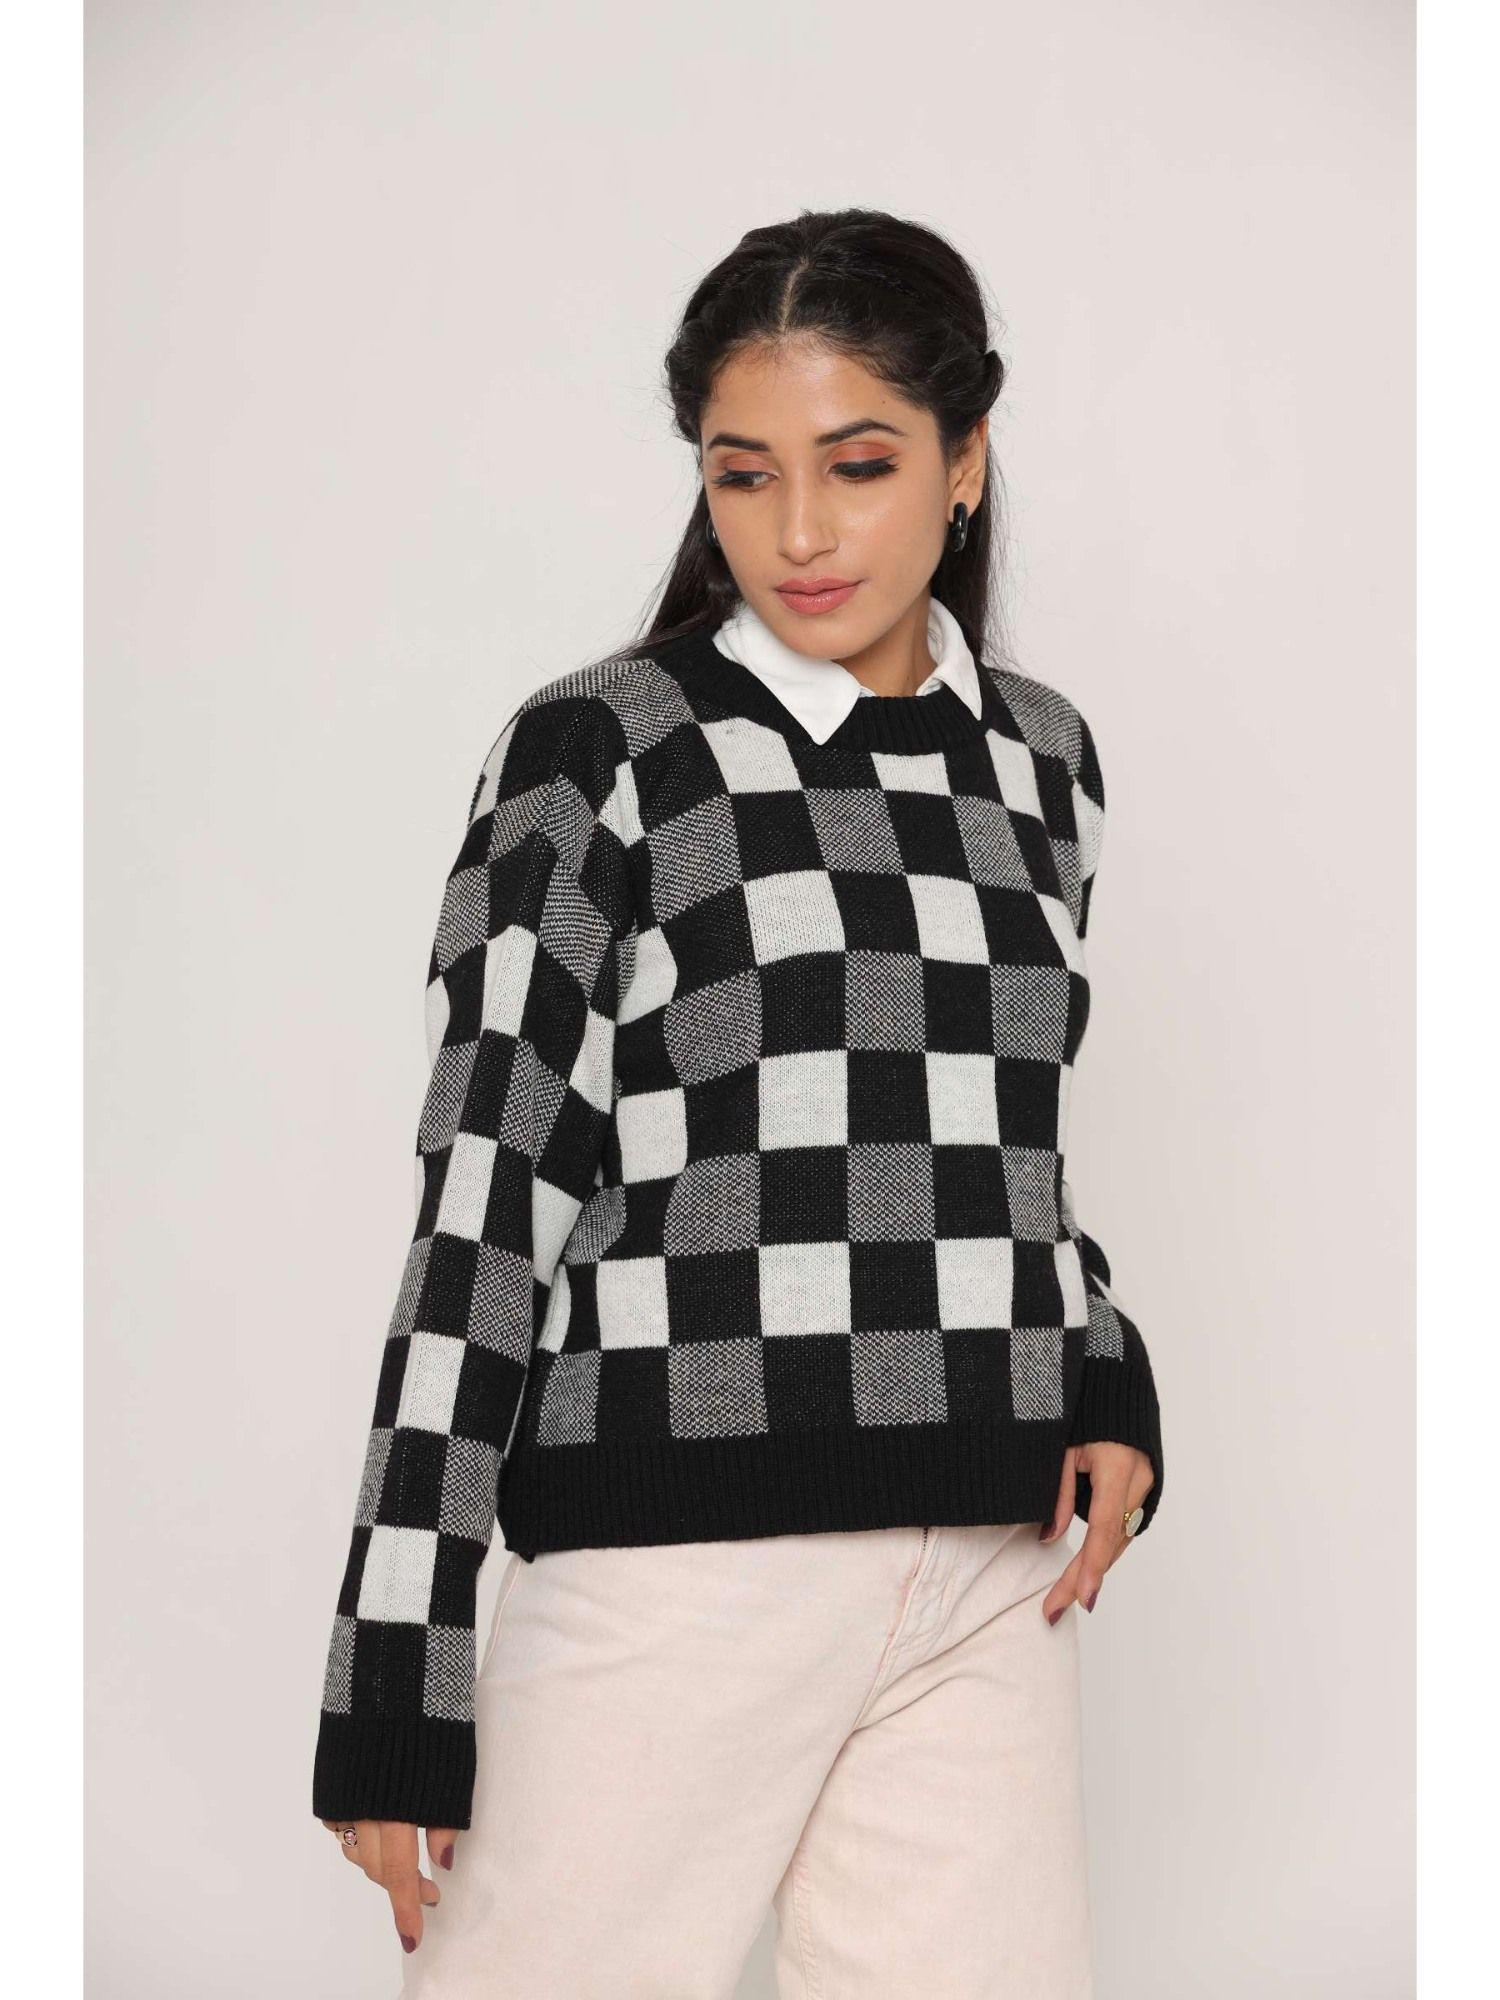 stylish-oversized-drop-shoulders-b-and-w-checkered-woollen-sweaters-for-women